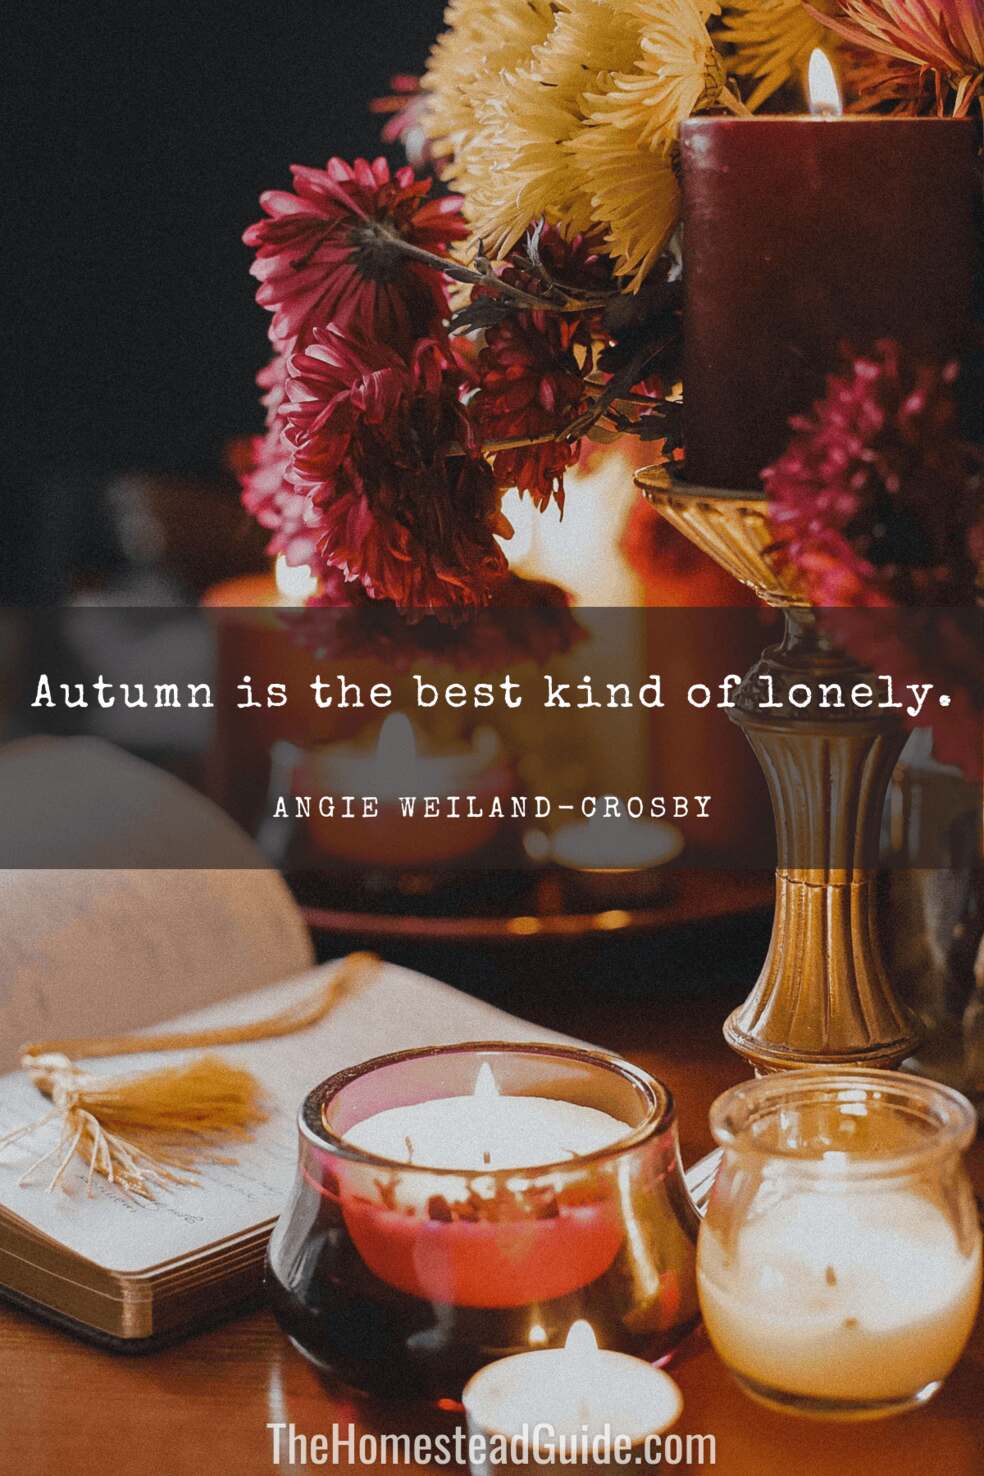 Autumn is the best kind of lonely.